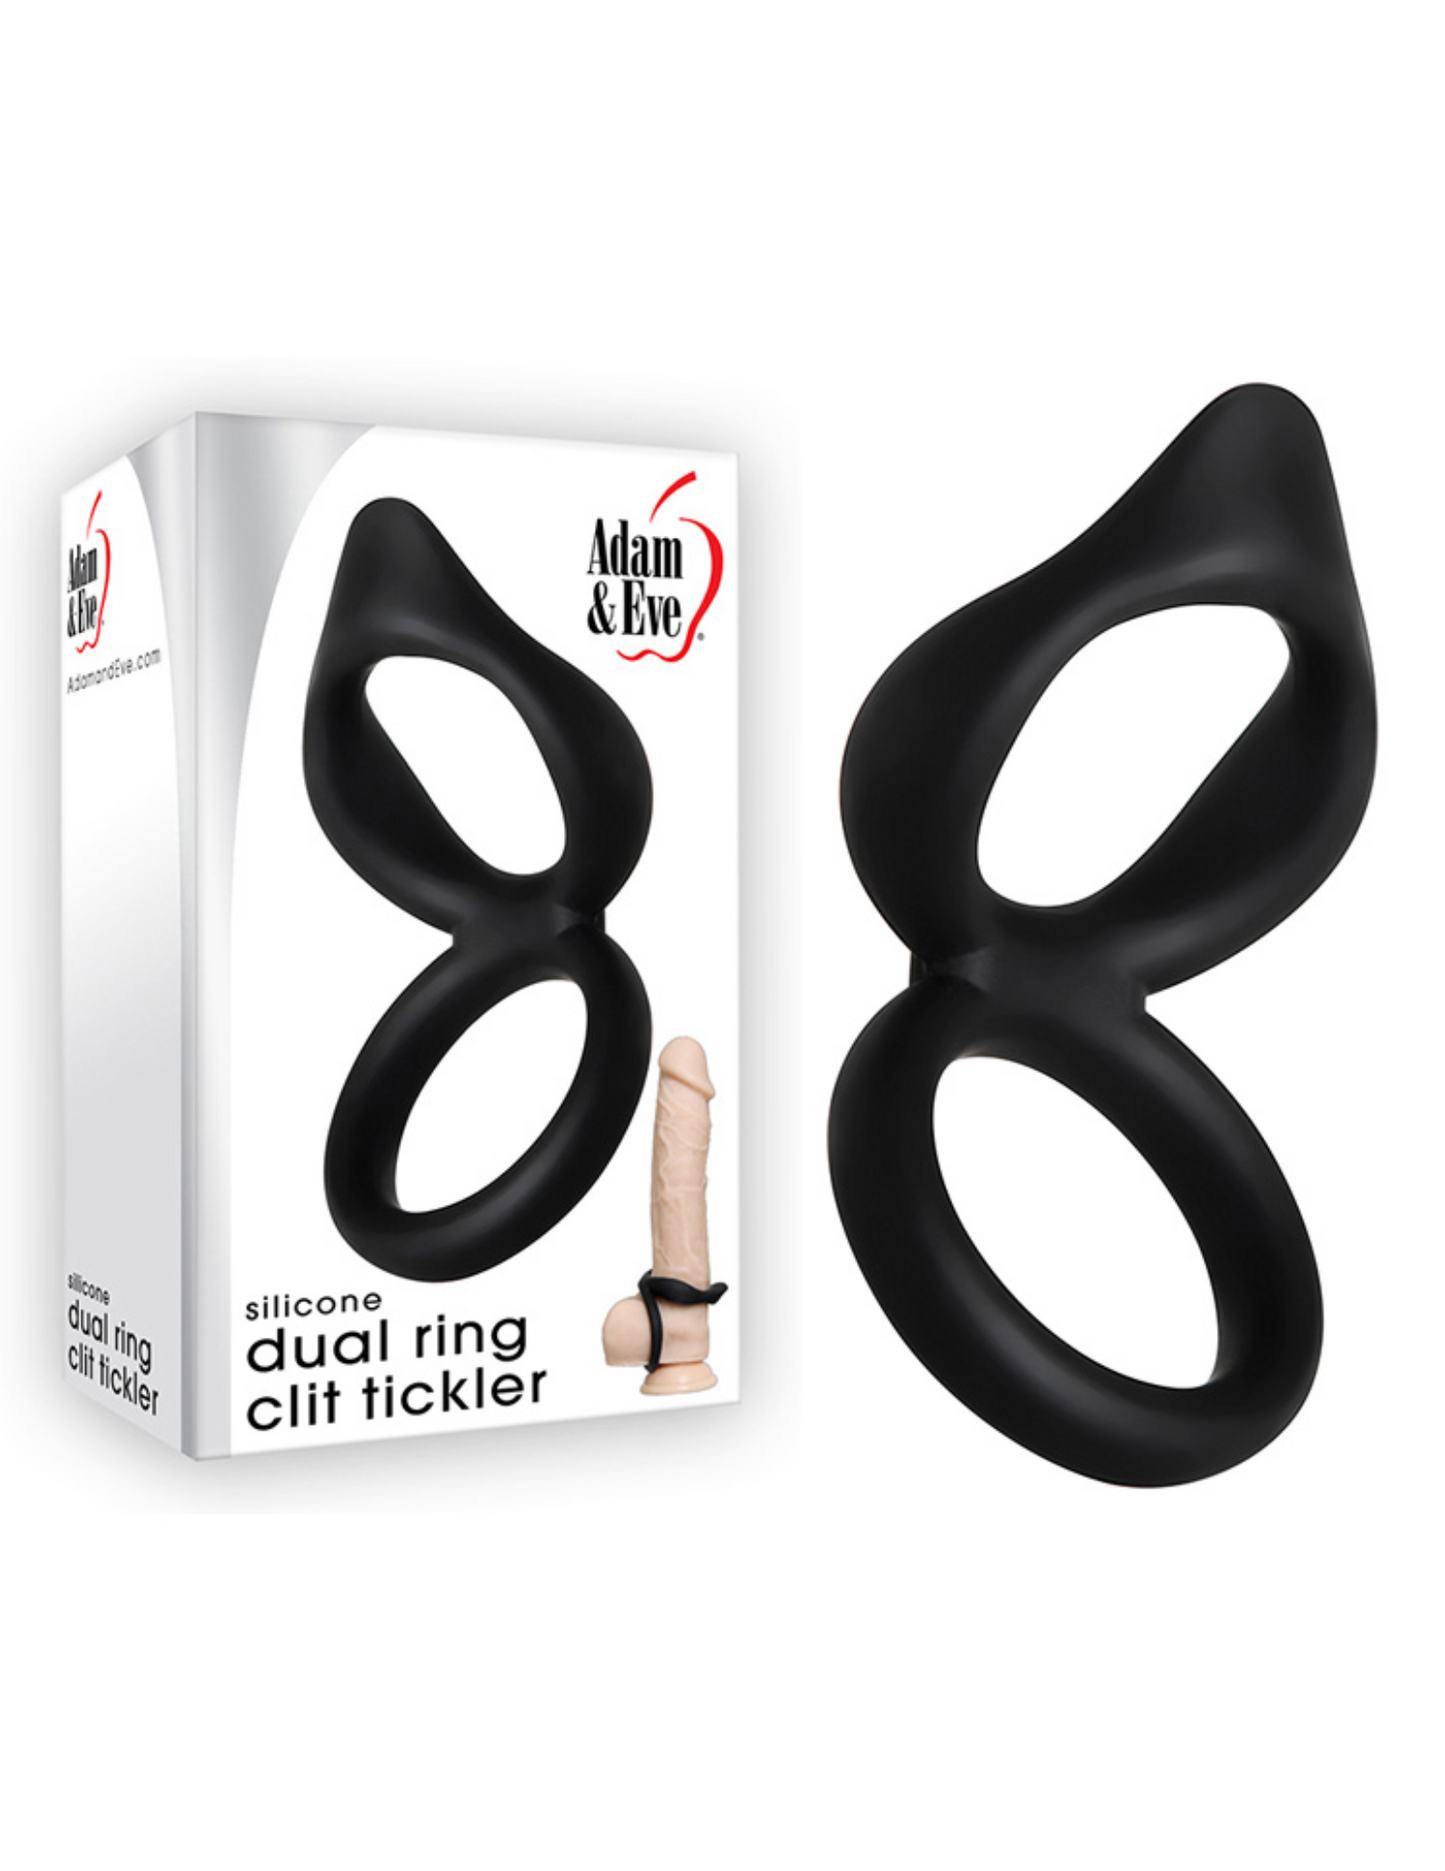 Photo shows the Adam and Eve Silicone Dual Ring Clit Tickler box and product.